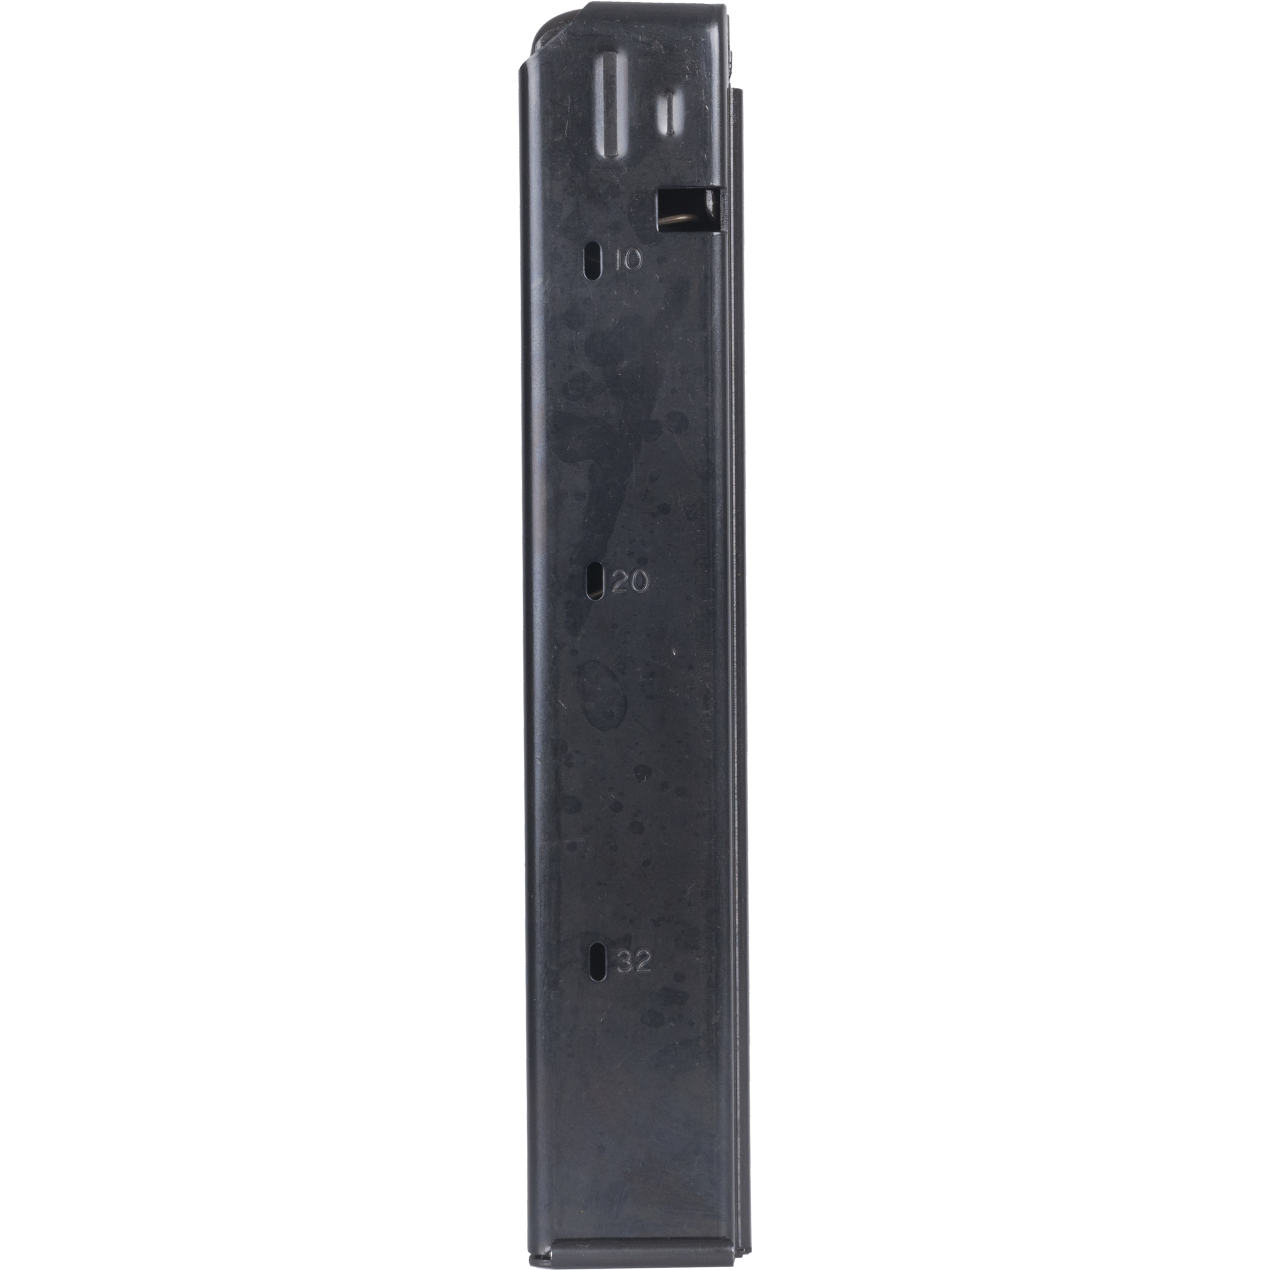 SPRINGFIELD ARMORY SAINT VICTOR / AR-15 9MM 32 RD MAGAZINE (MADE BY METALFORM) ARS6032